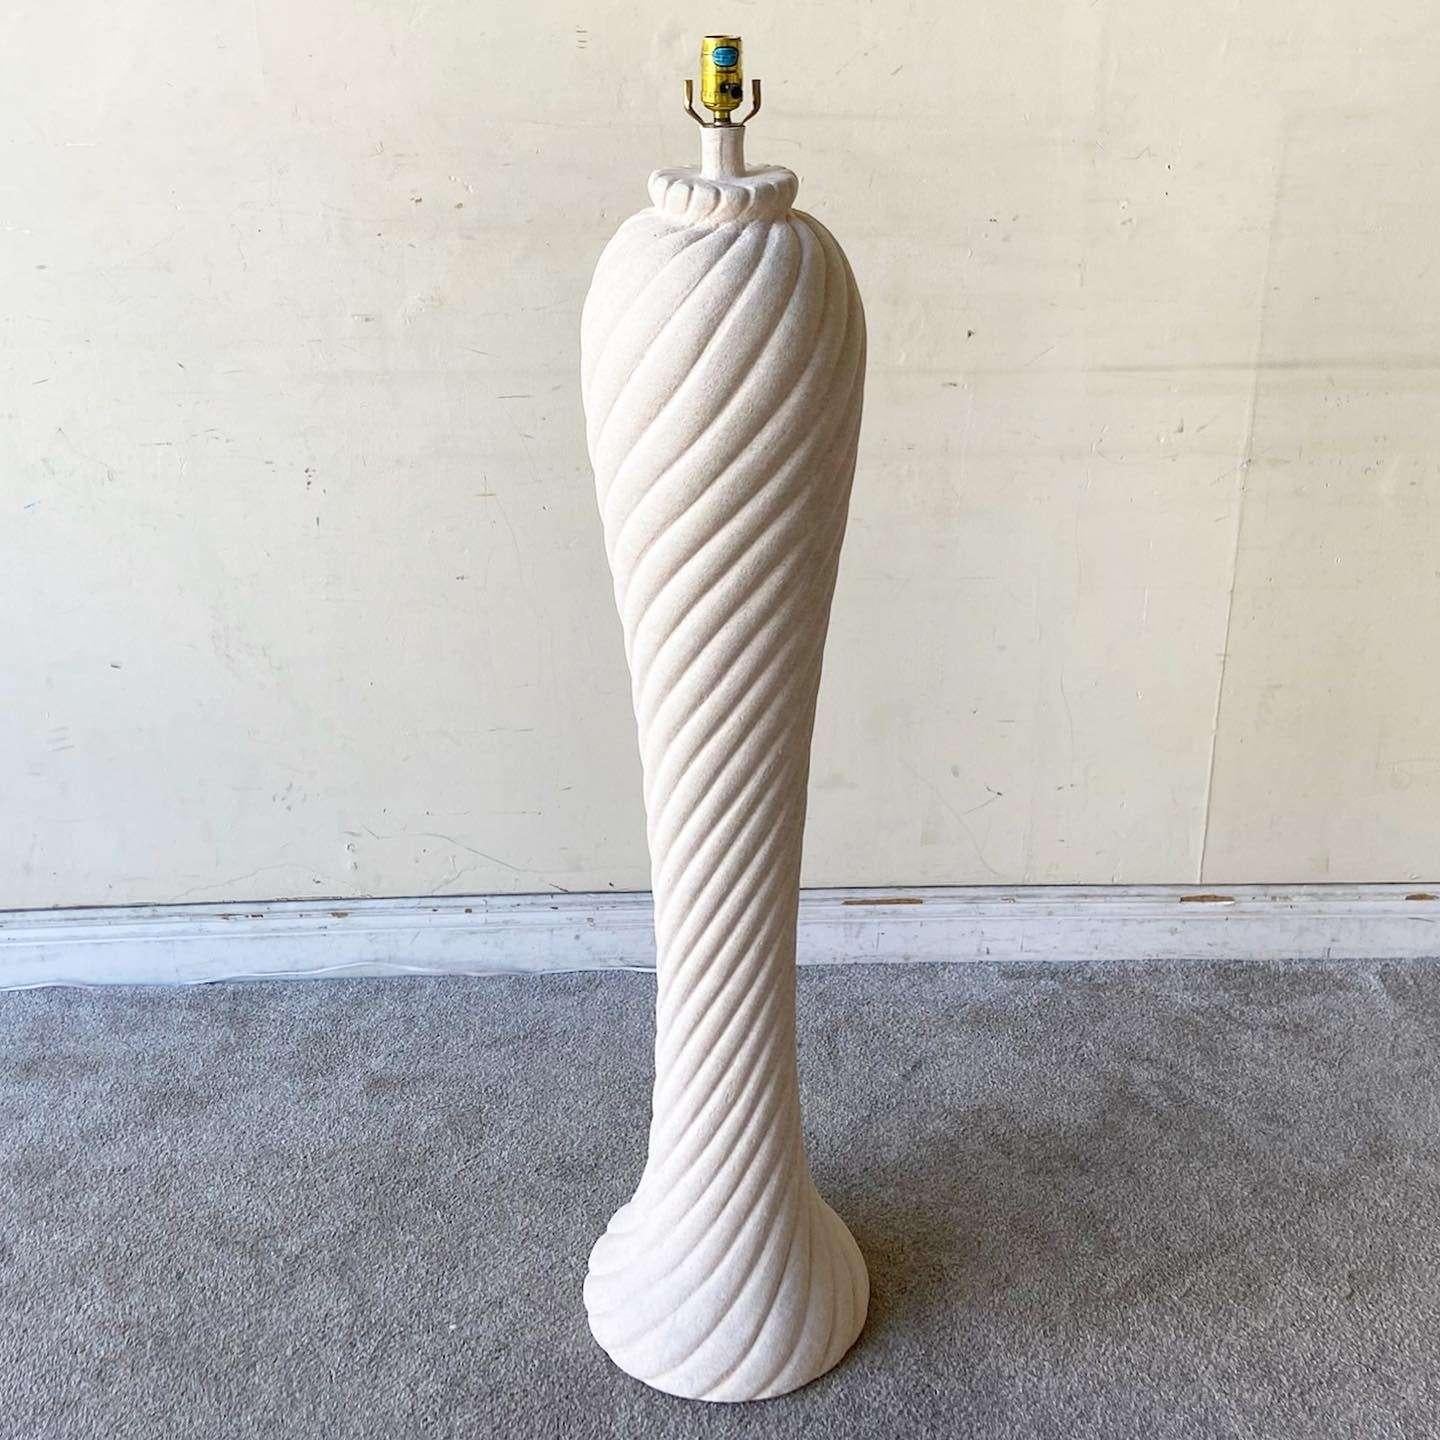 Exceptional vintage postmodern ceramic floor lamp. Features a light pink lavender over off white finish with a spiral swirl sculpted body. 